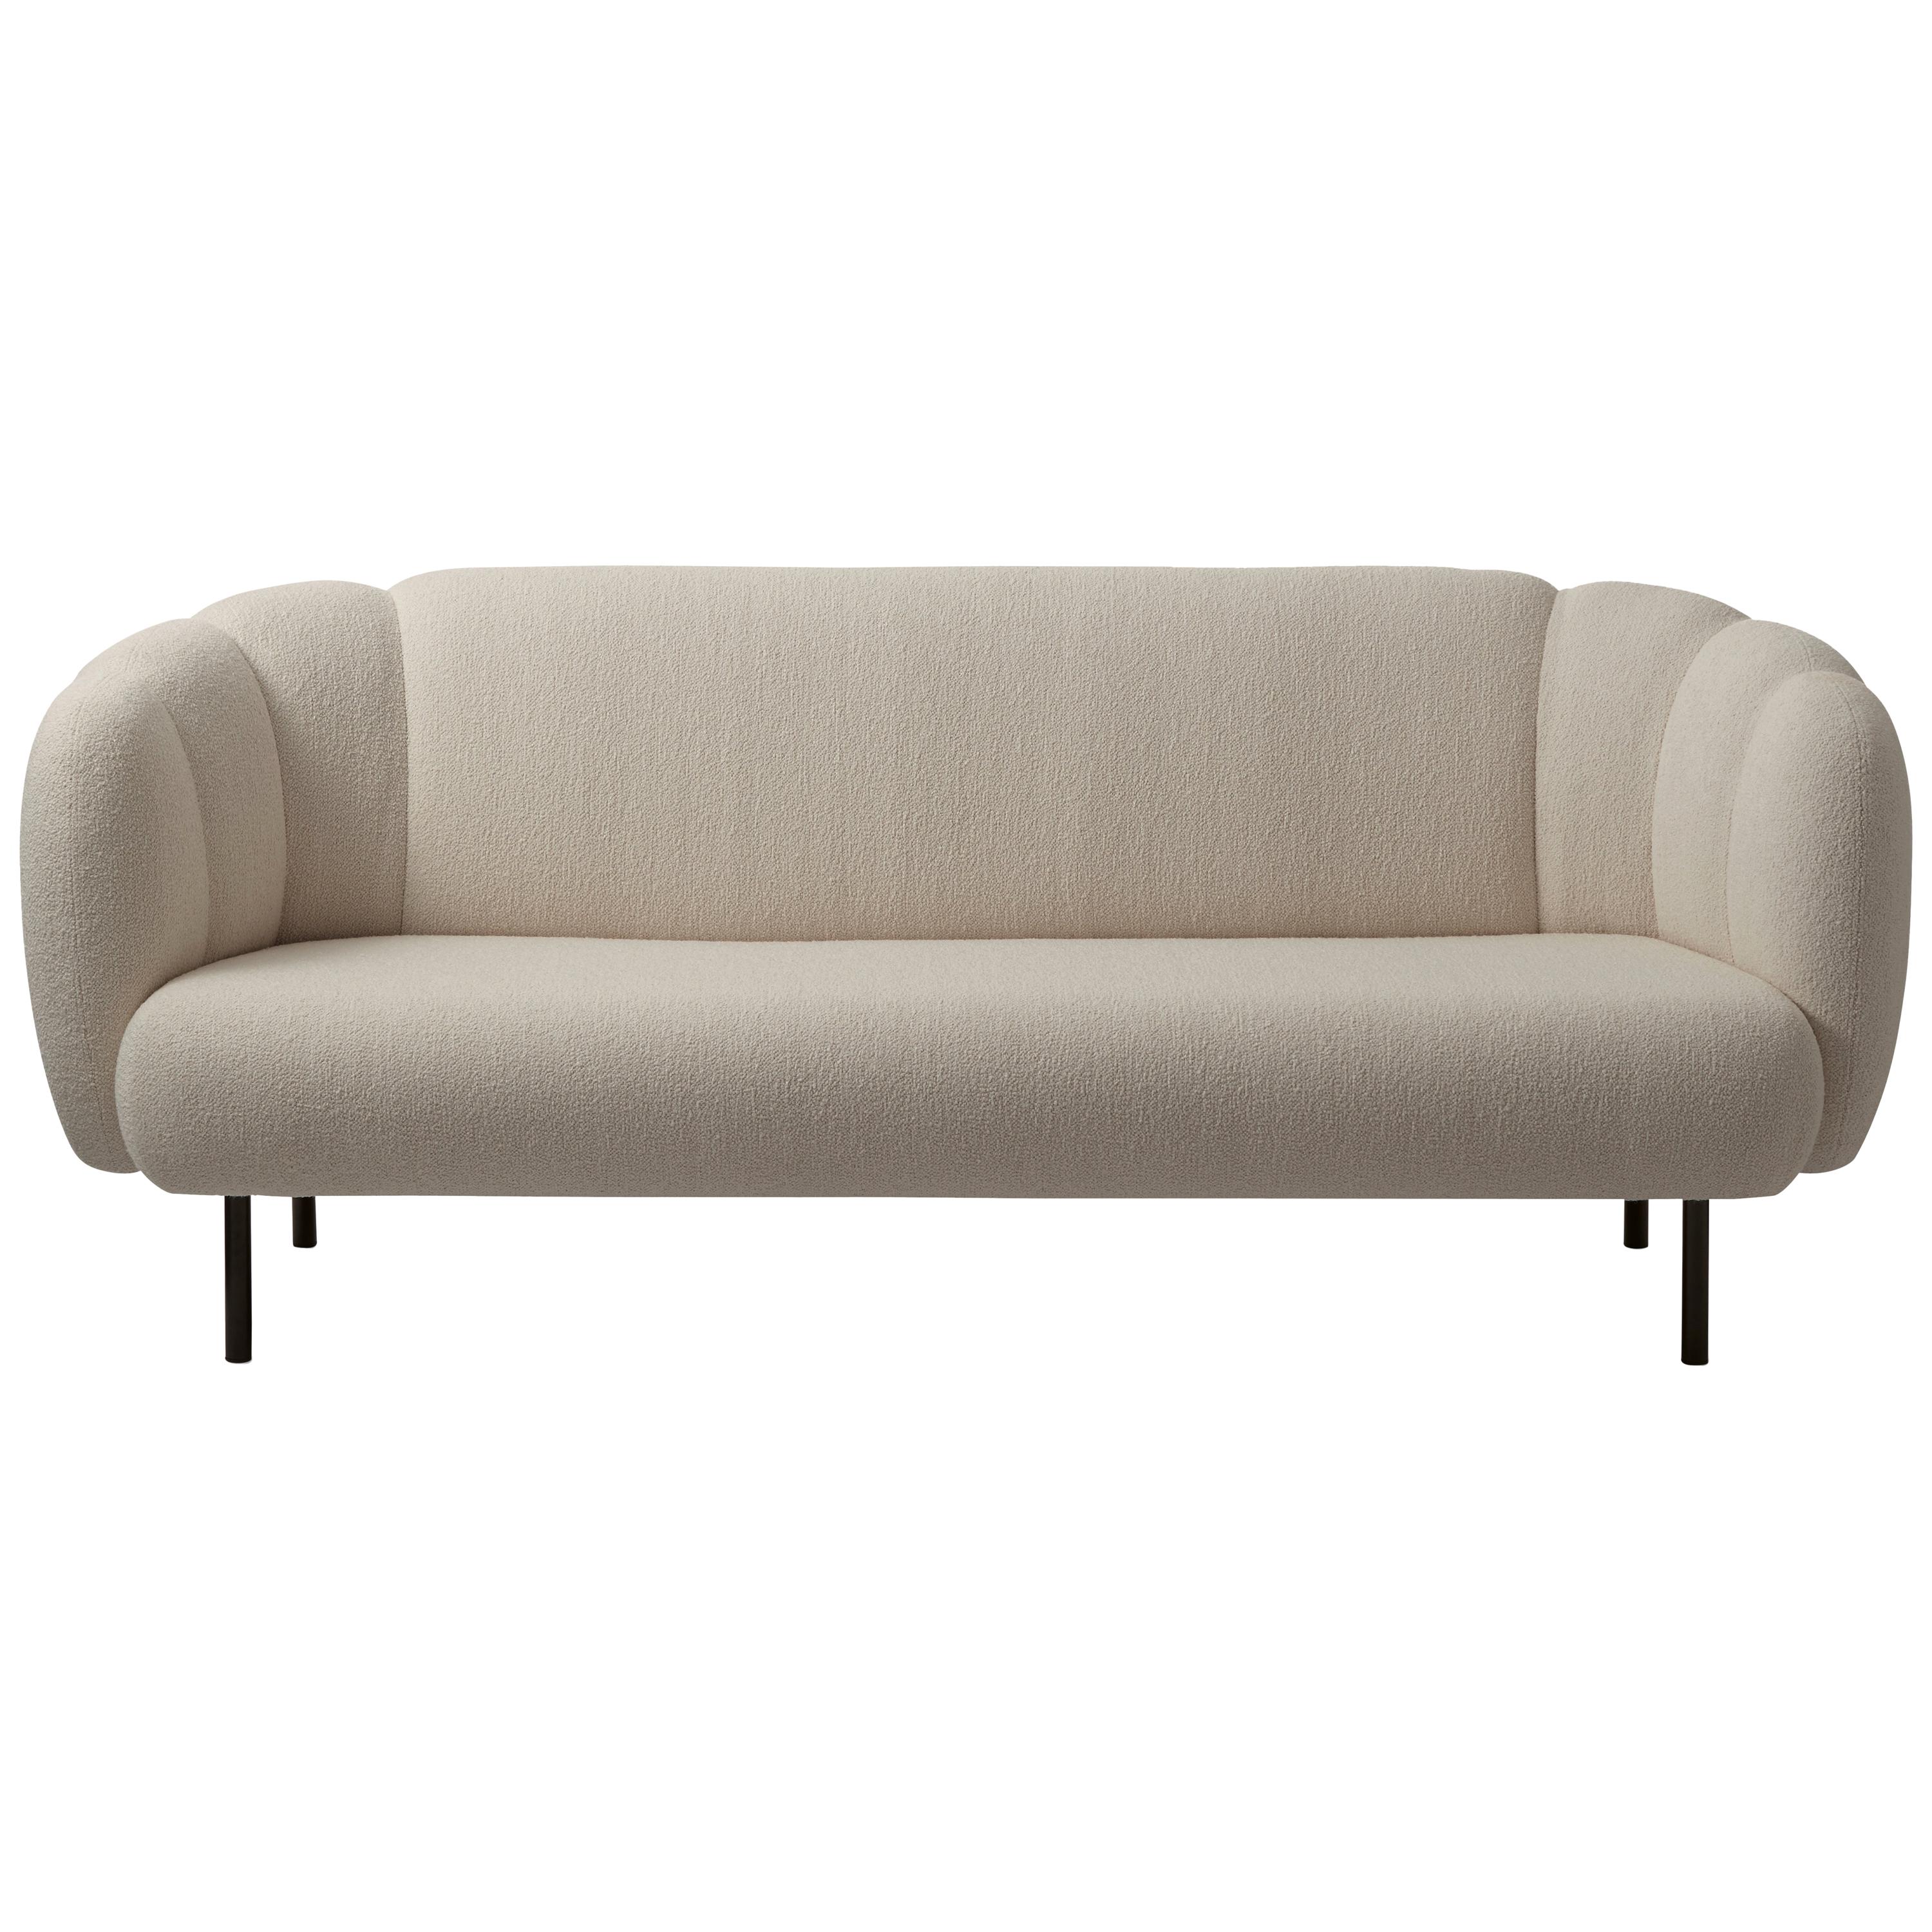 For Sale: Gray (Barnum 2) Cape 3-Seat Stitch Sofa, by Charlotte Høncke from Warm Nordic